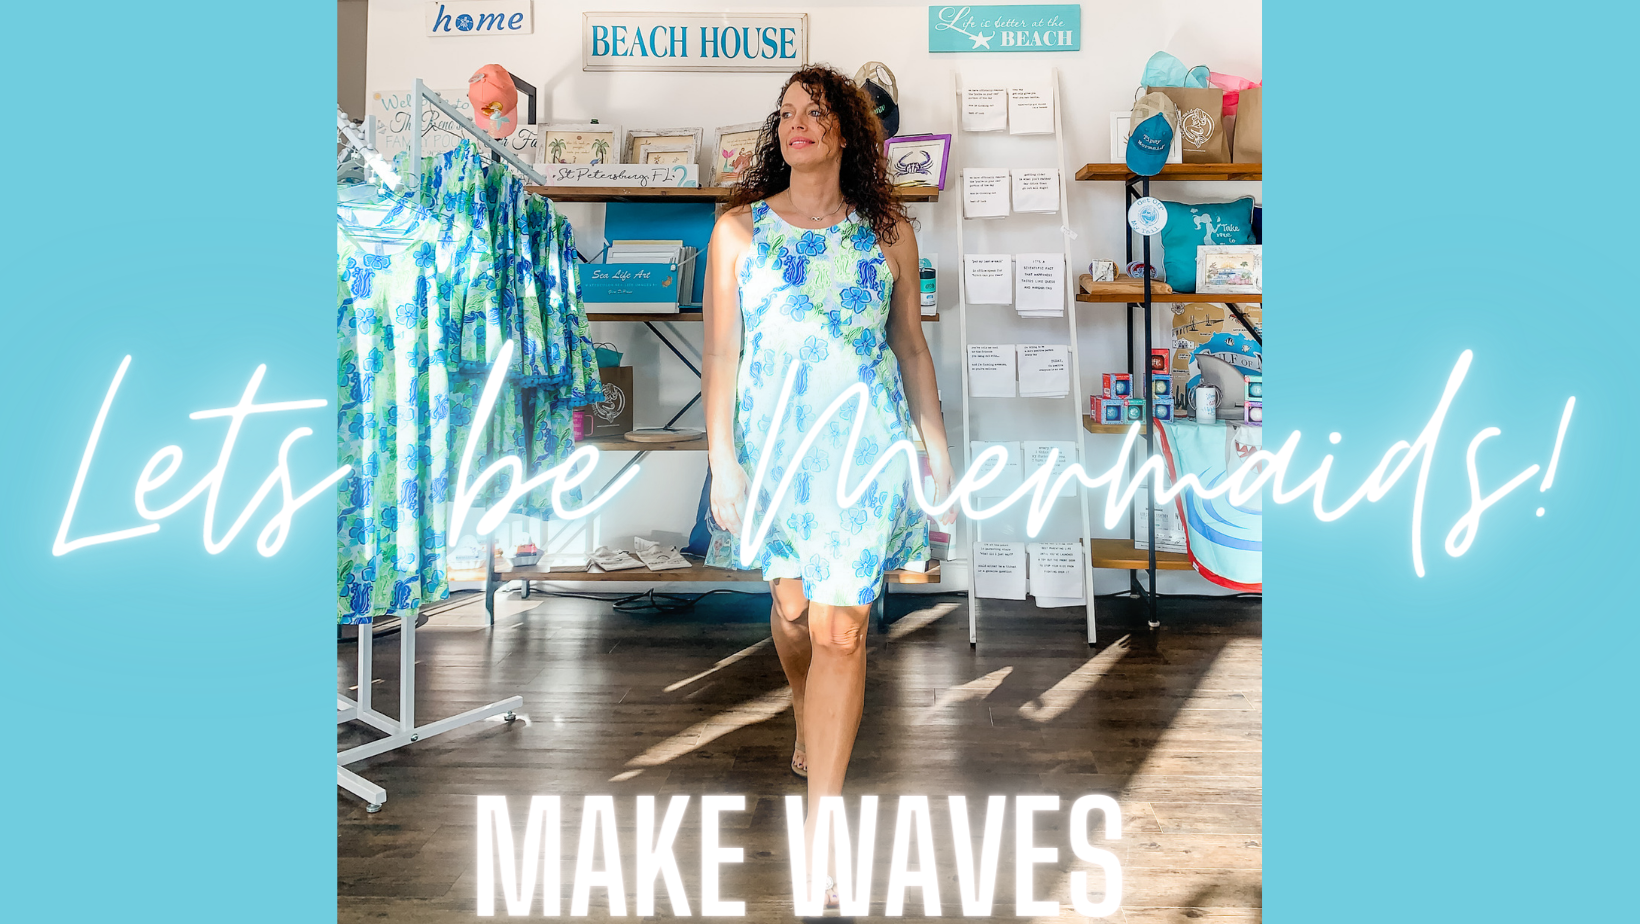 Tipsy Mermaid Boutique  Coastal Clothing, Home Decor and Fun Gifts